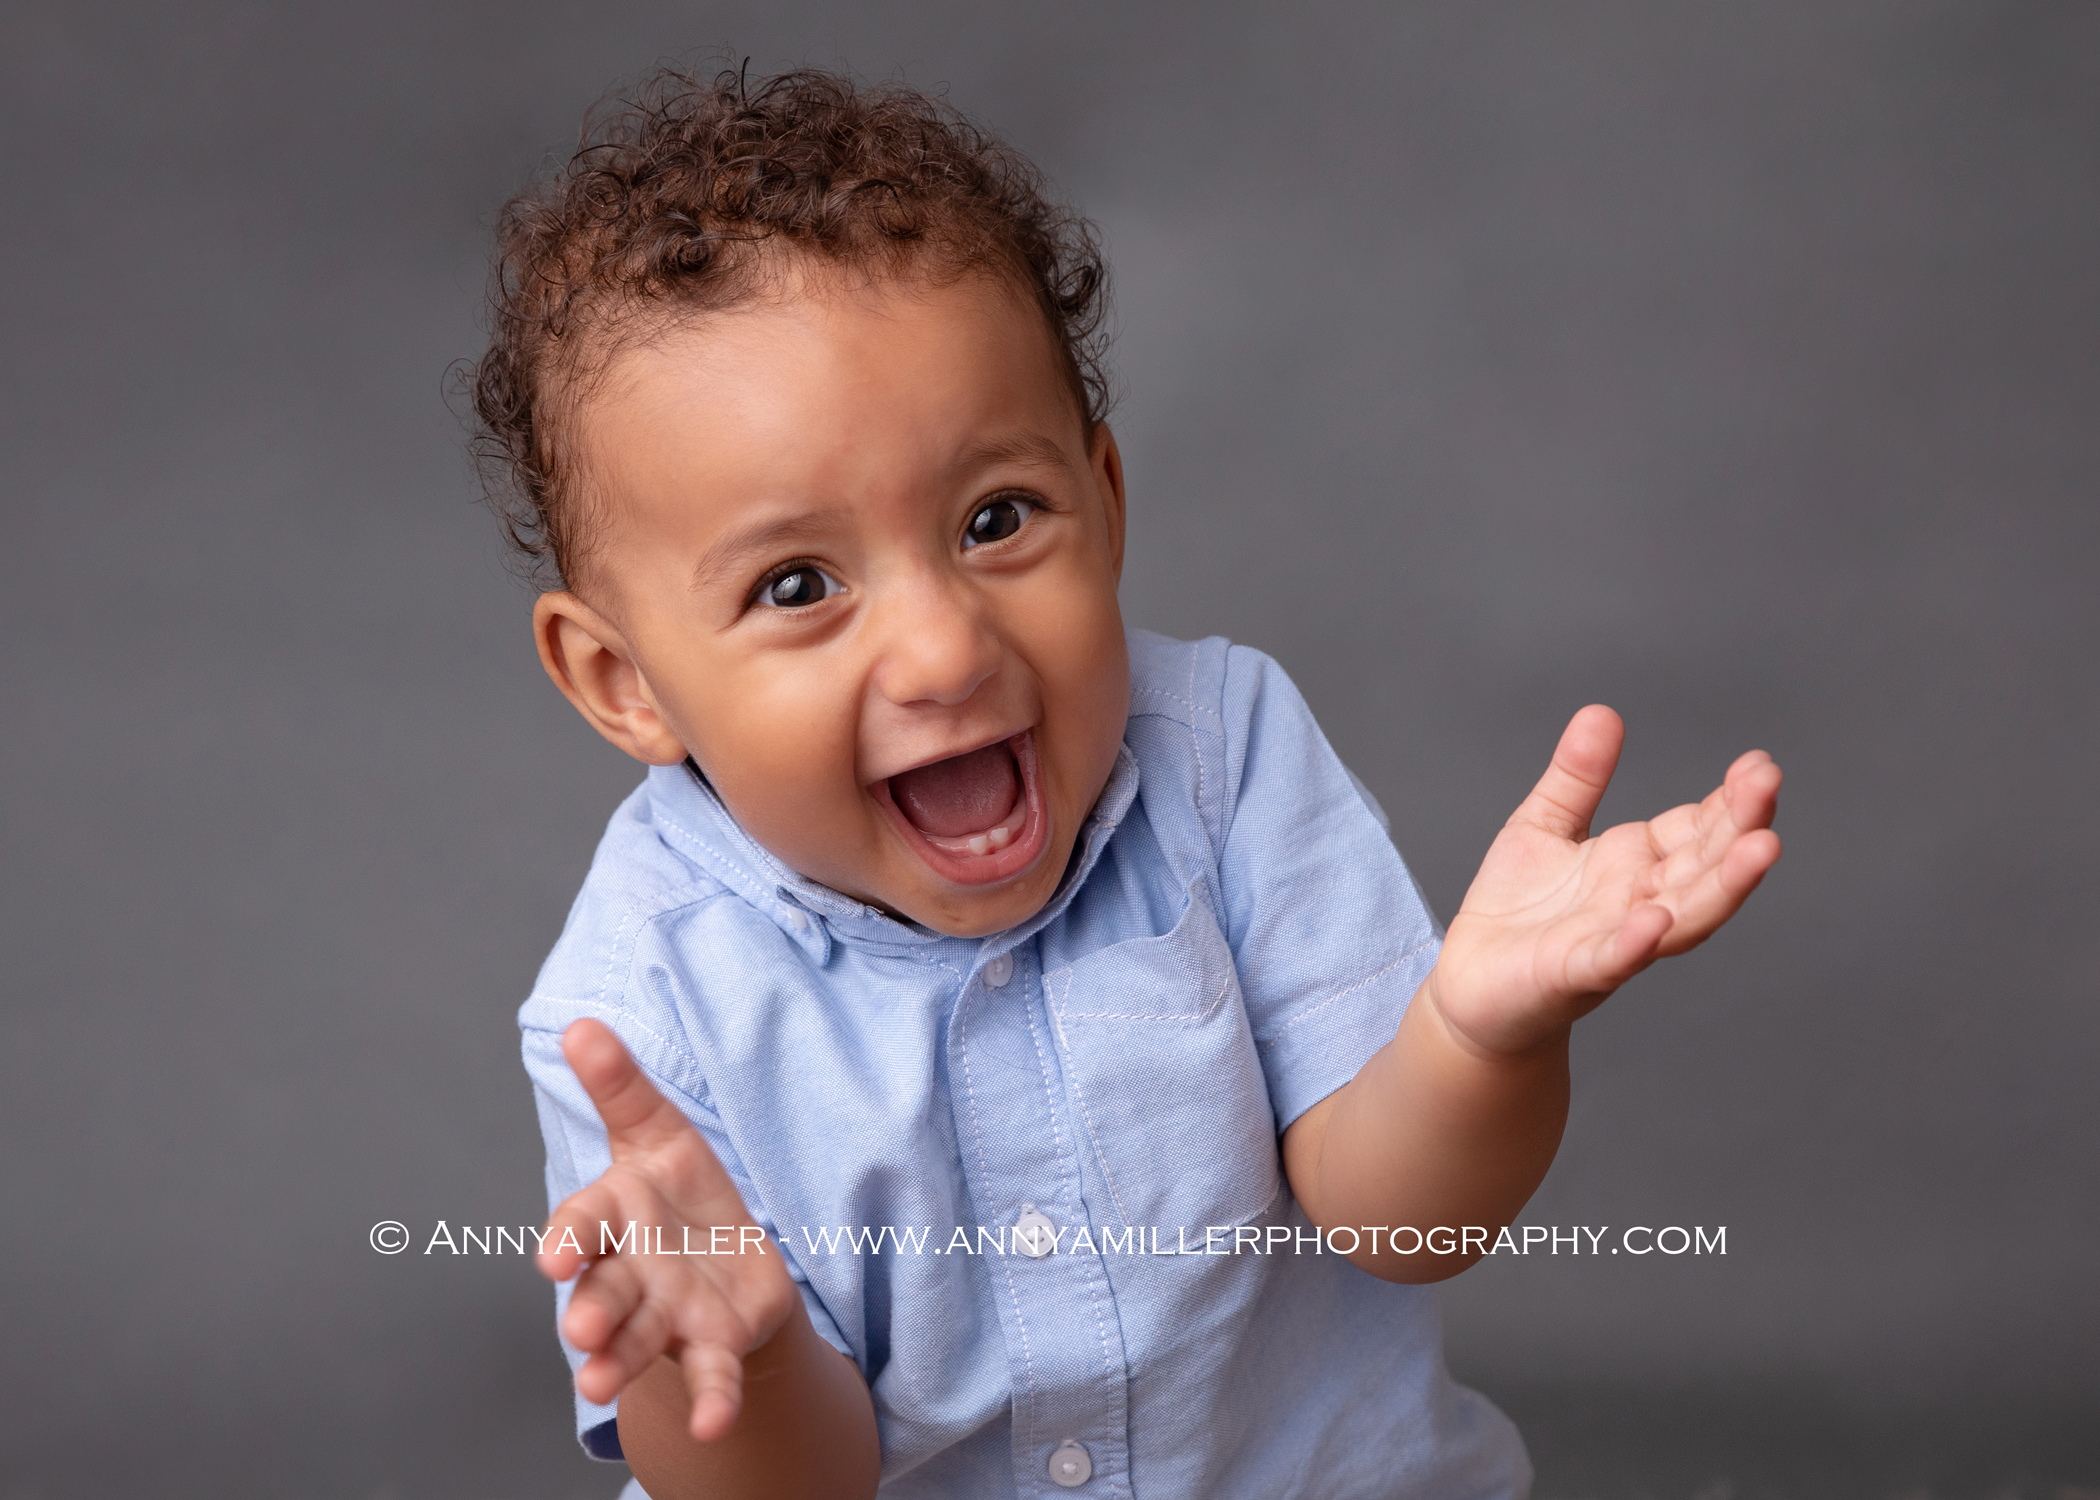 First birthday portraits of little boy by Pickering baby photographer Annya Miller